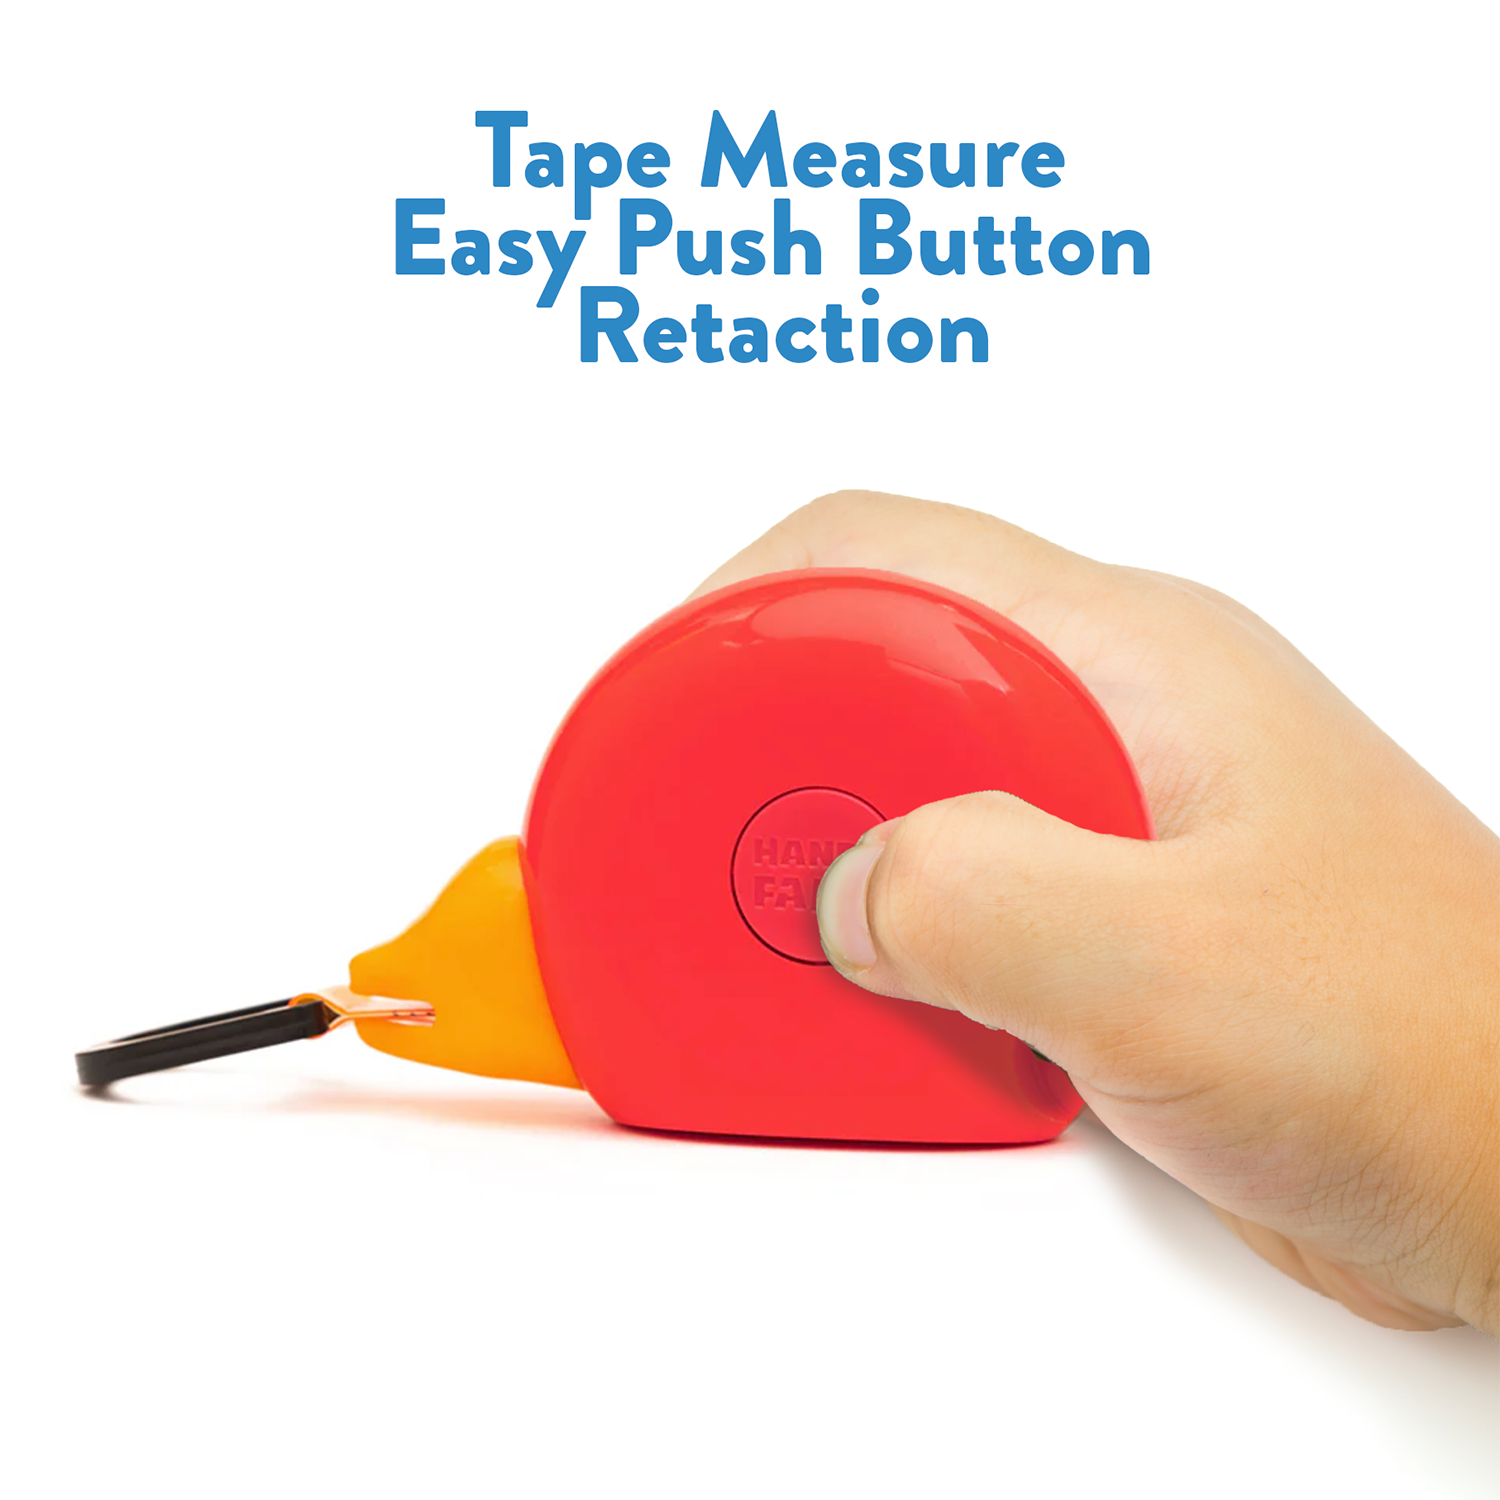 Kids Measuring Tape Photos, Images and Pictures